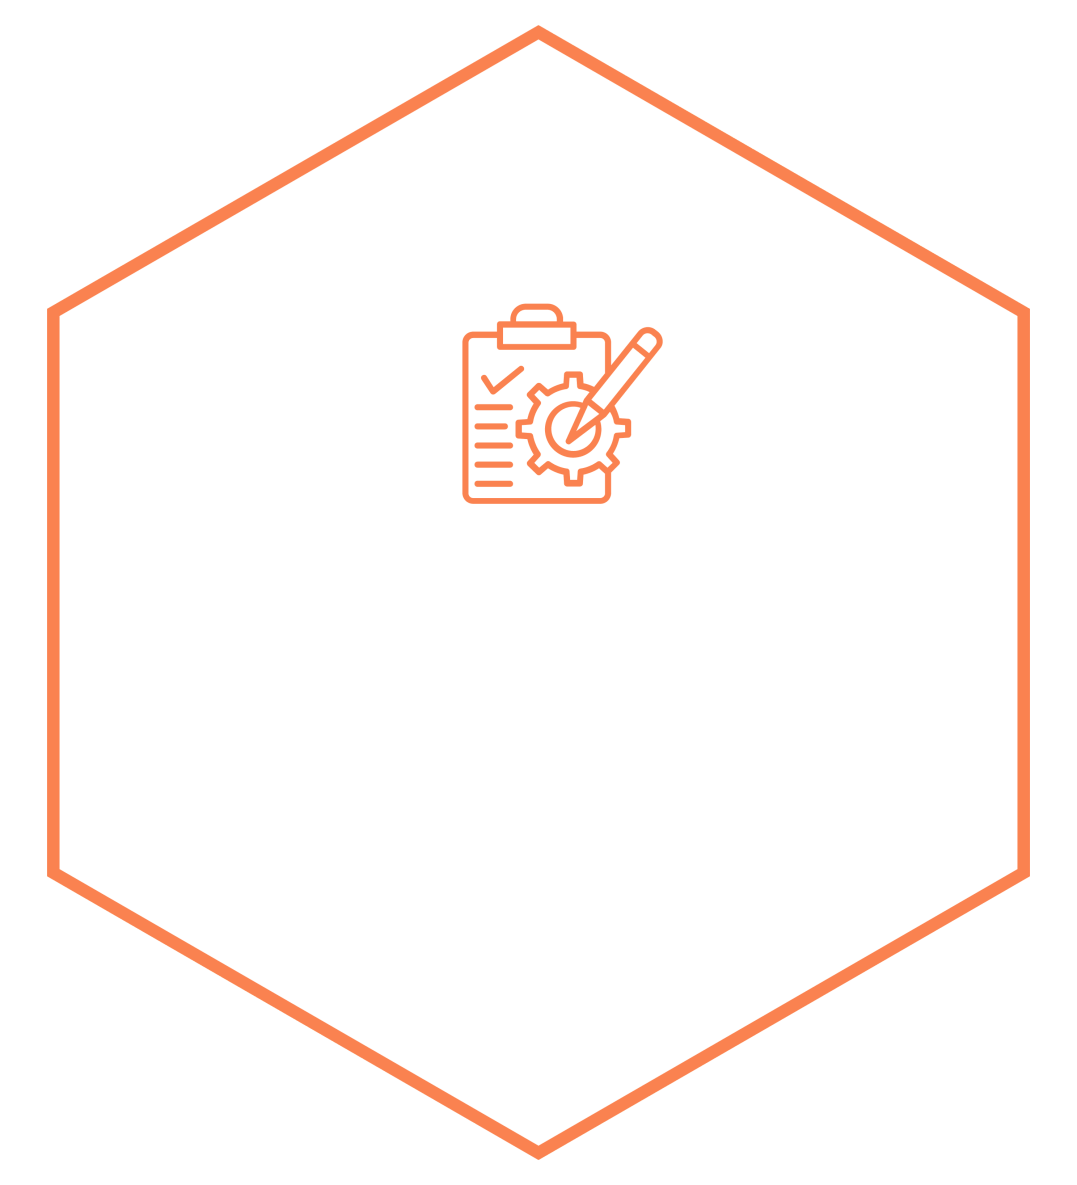 Accelerated Capability Assurance